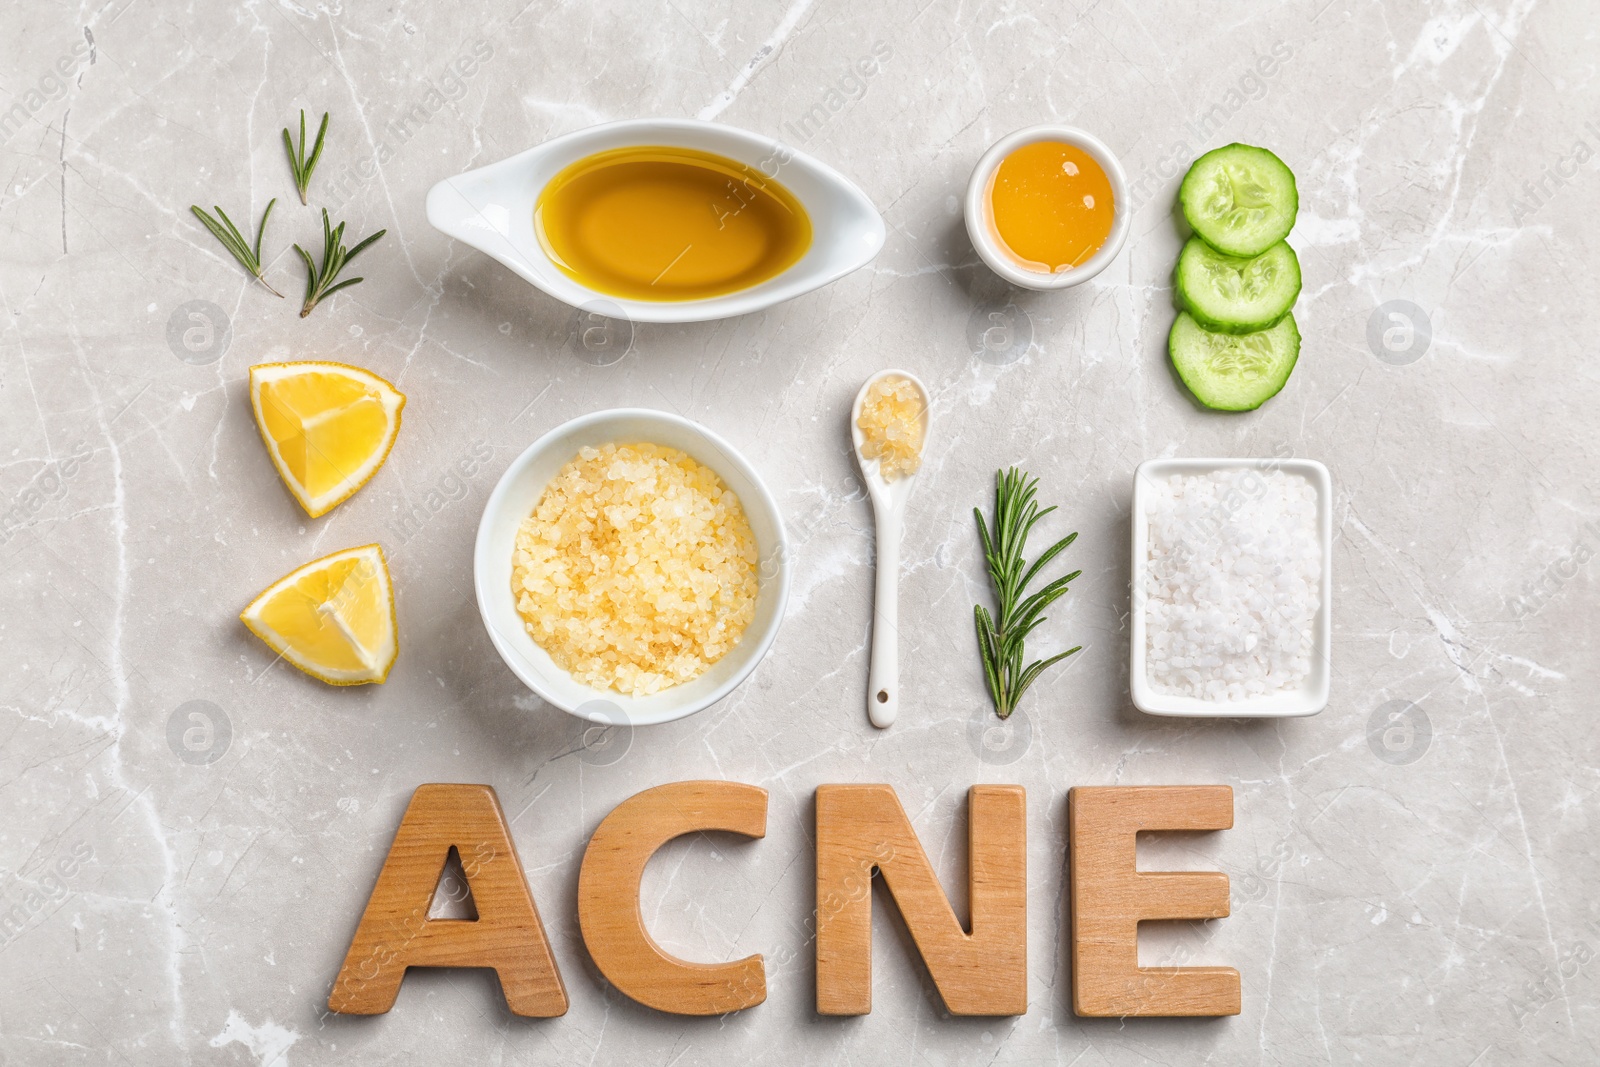 Photo of Word "Acne" and fresh ingredients for homemade problem skin remedy on light background